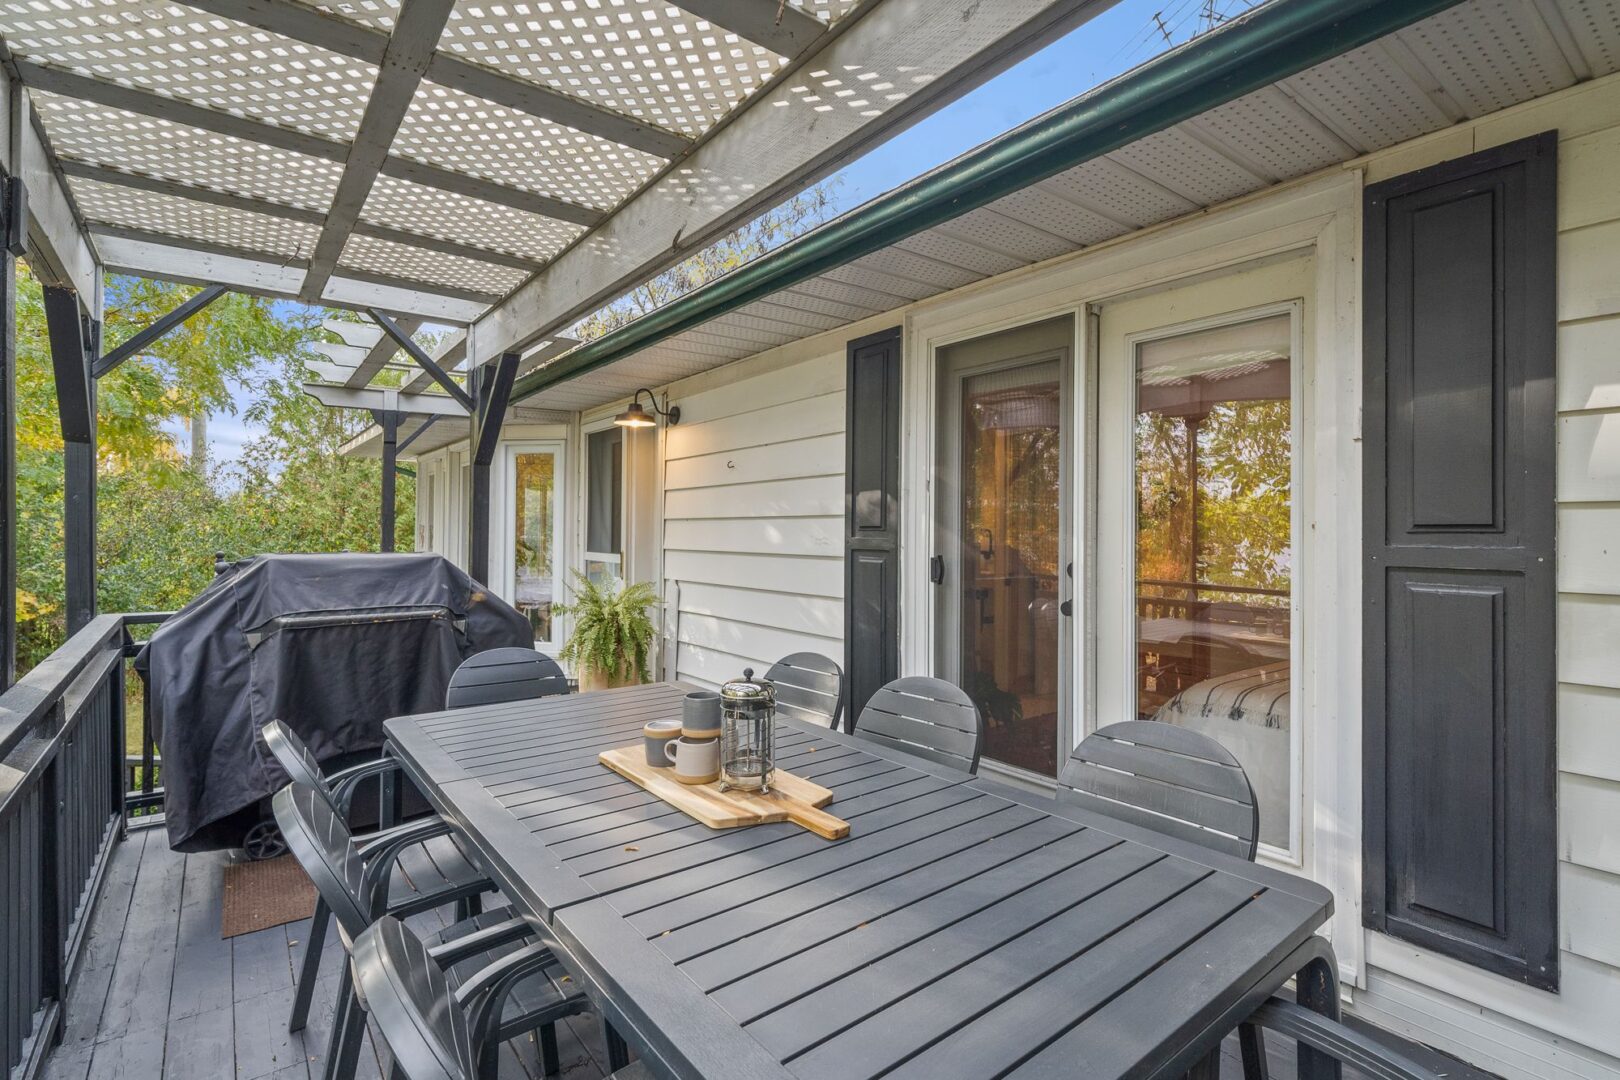 A barbecue and an outdoor dining table and chairs sit on the front porch of a raised bungalow.